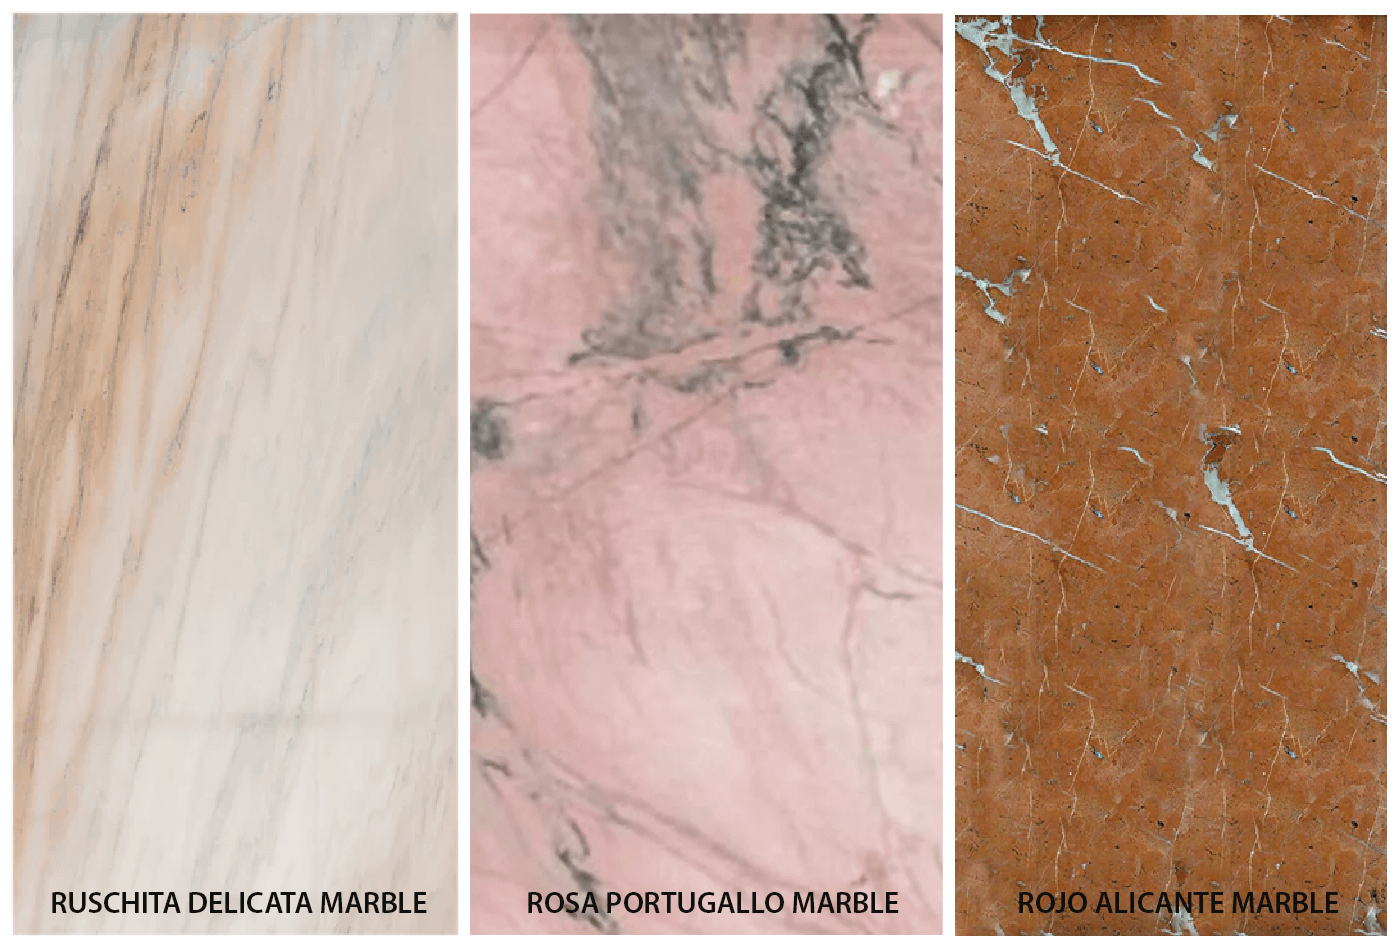 Pick up Some Varieties of Pink Marble from Our Wide Range of Collections